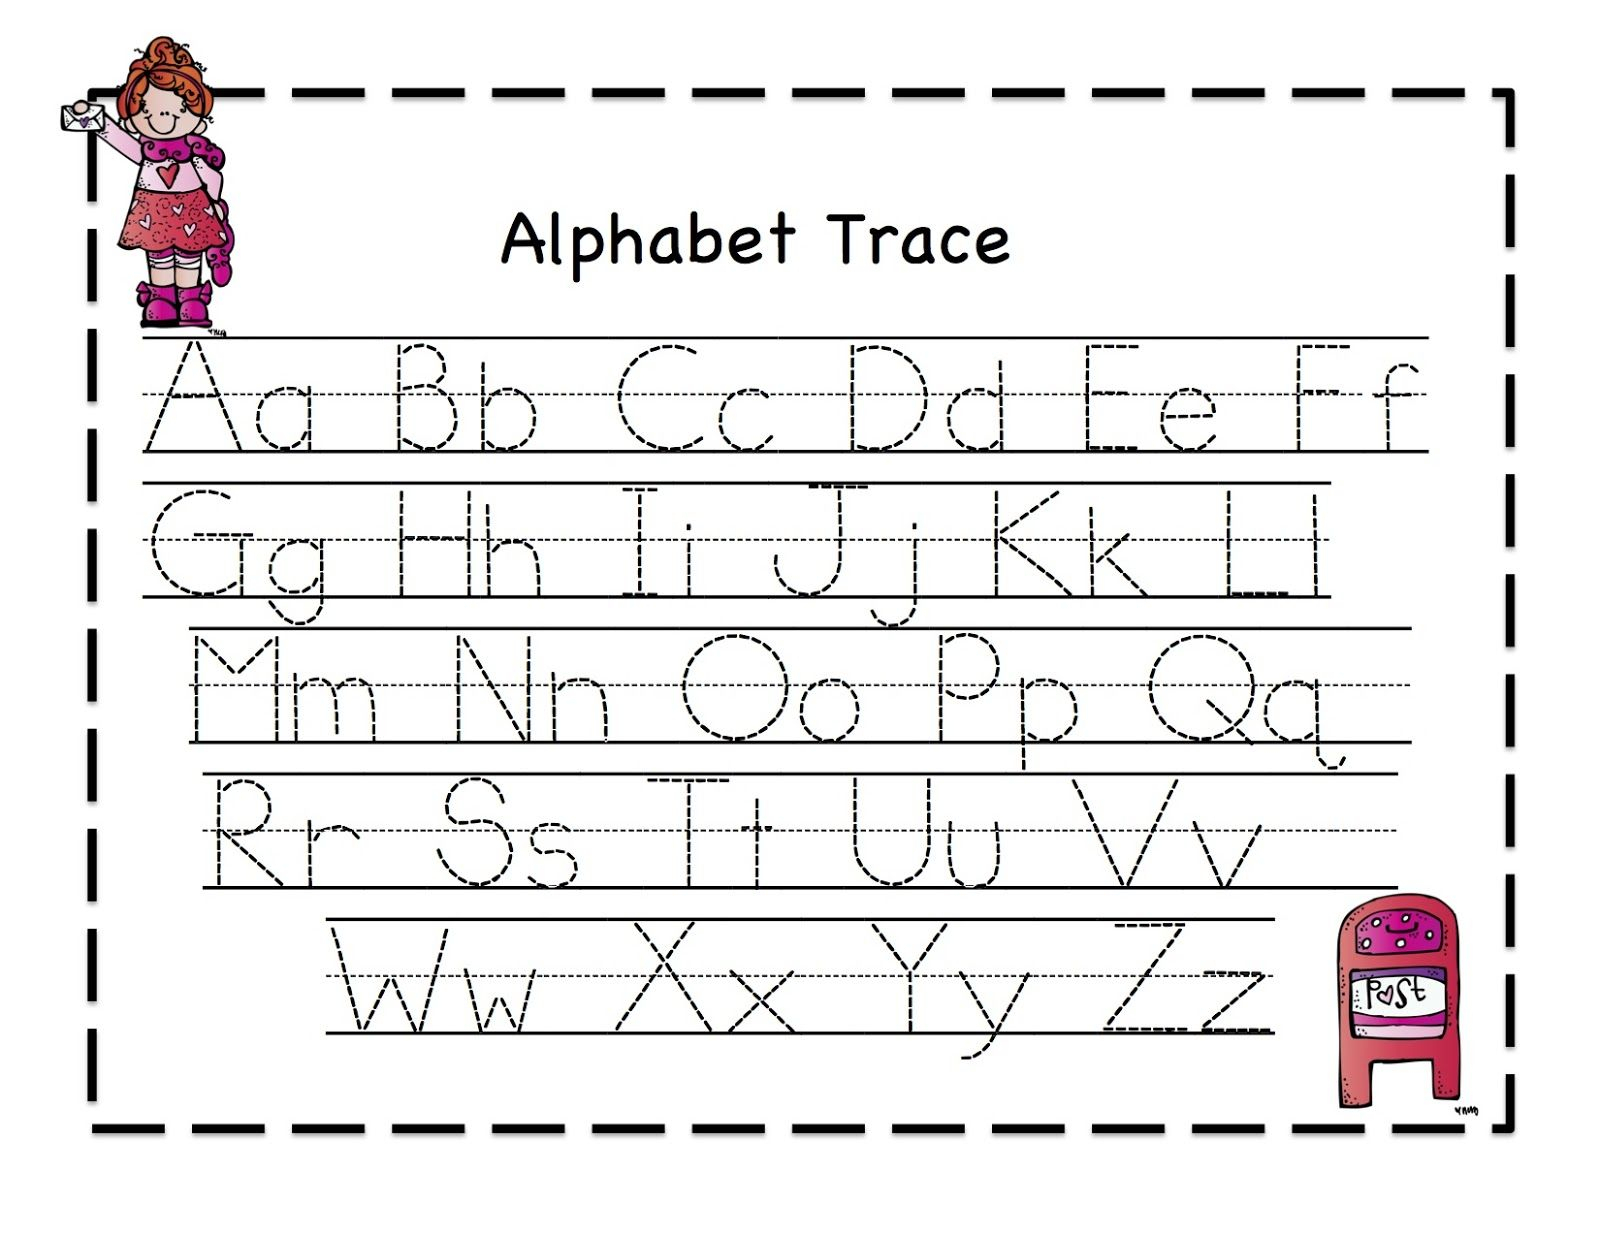 Alphabet Tracing Pages 2014 Printable | Alphabet Tracing intended for Alphabet Tracing Template